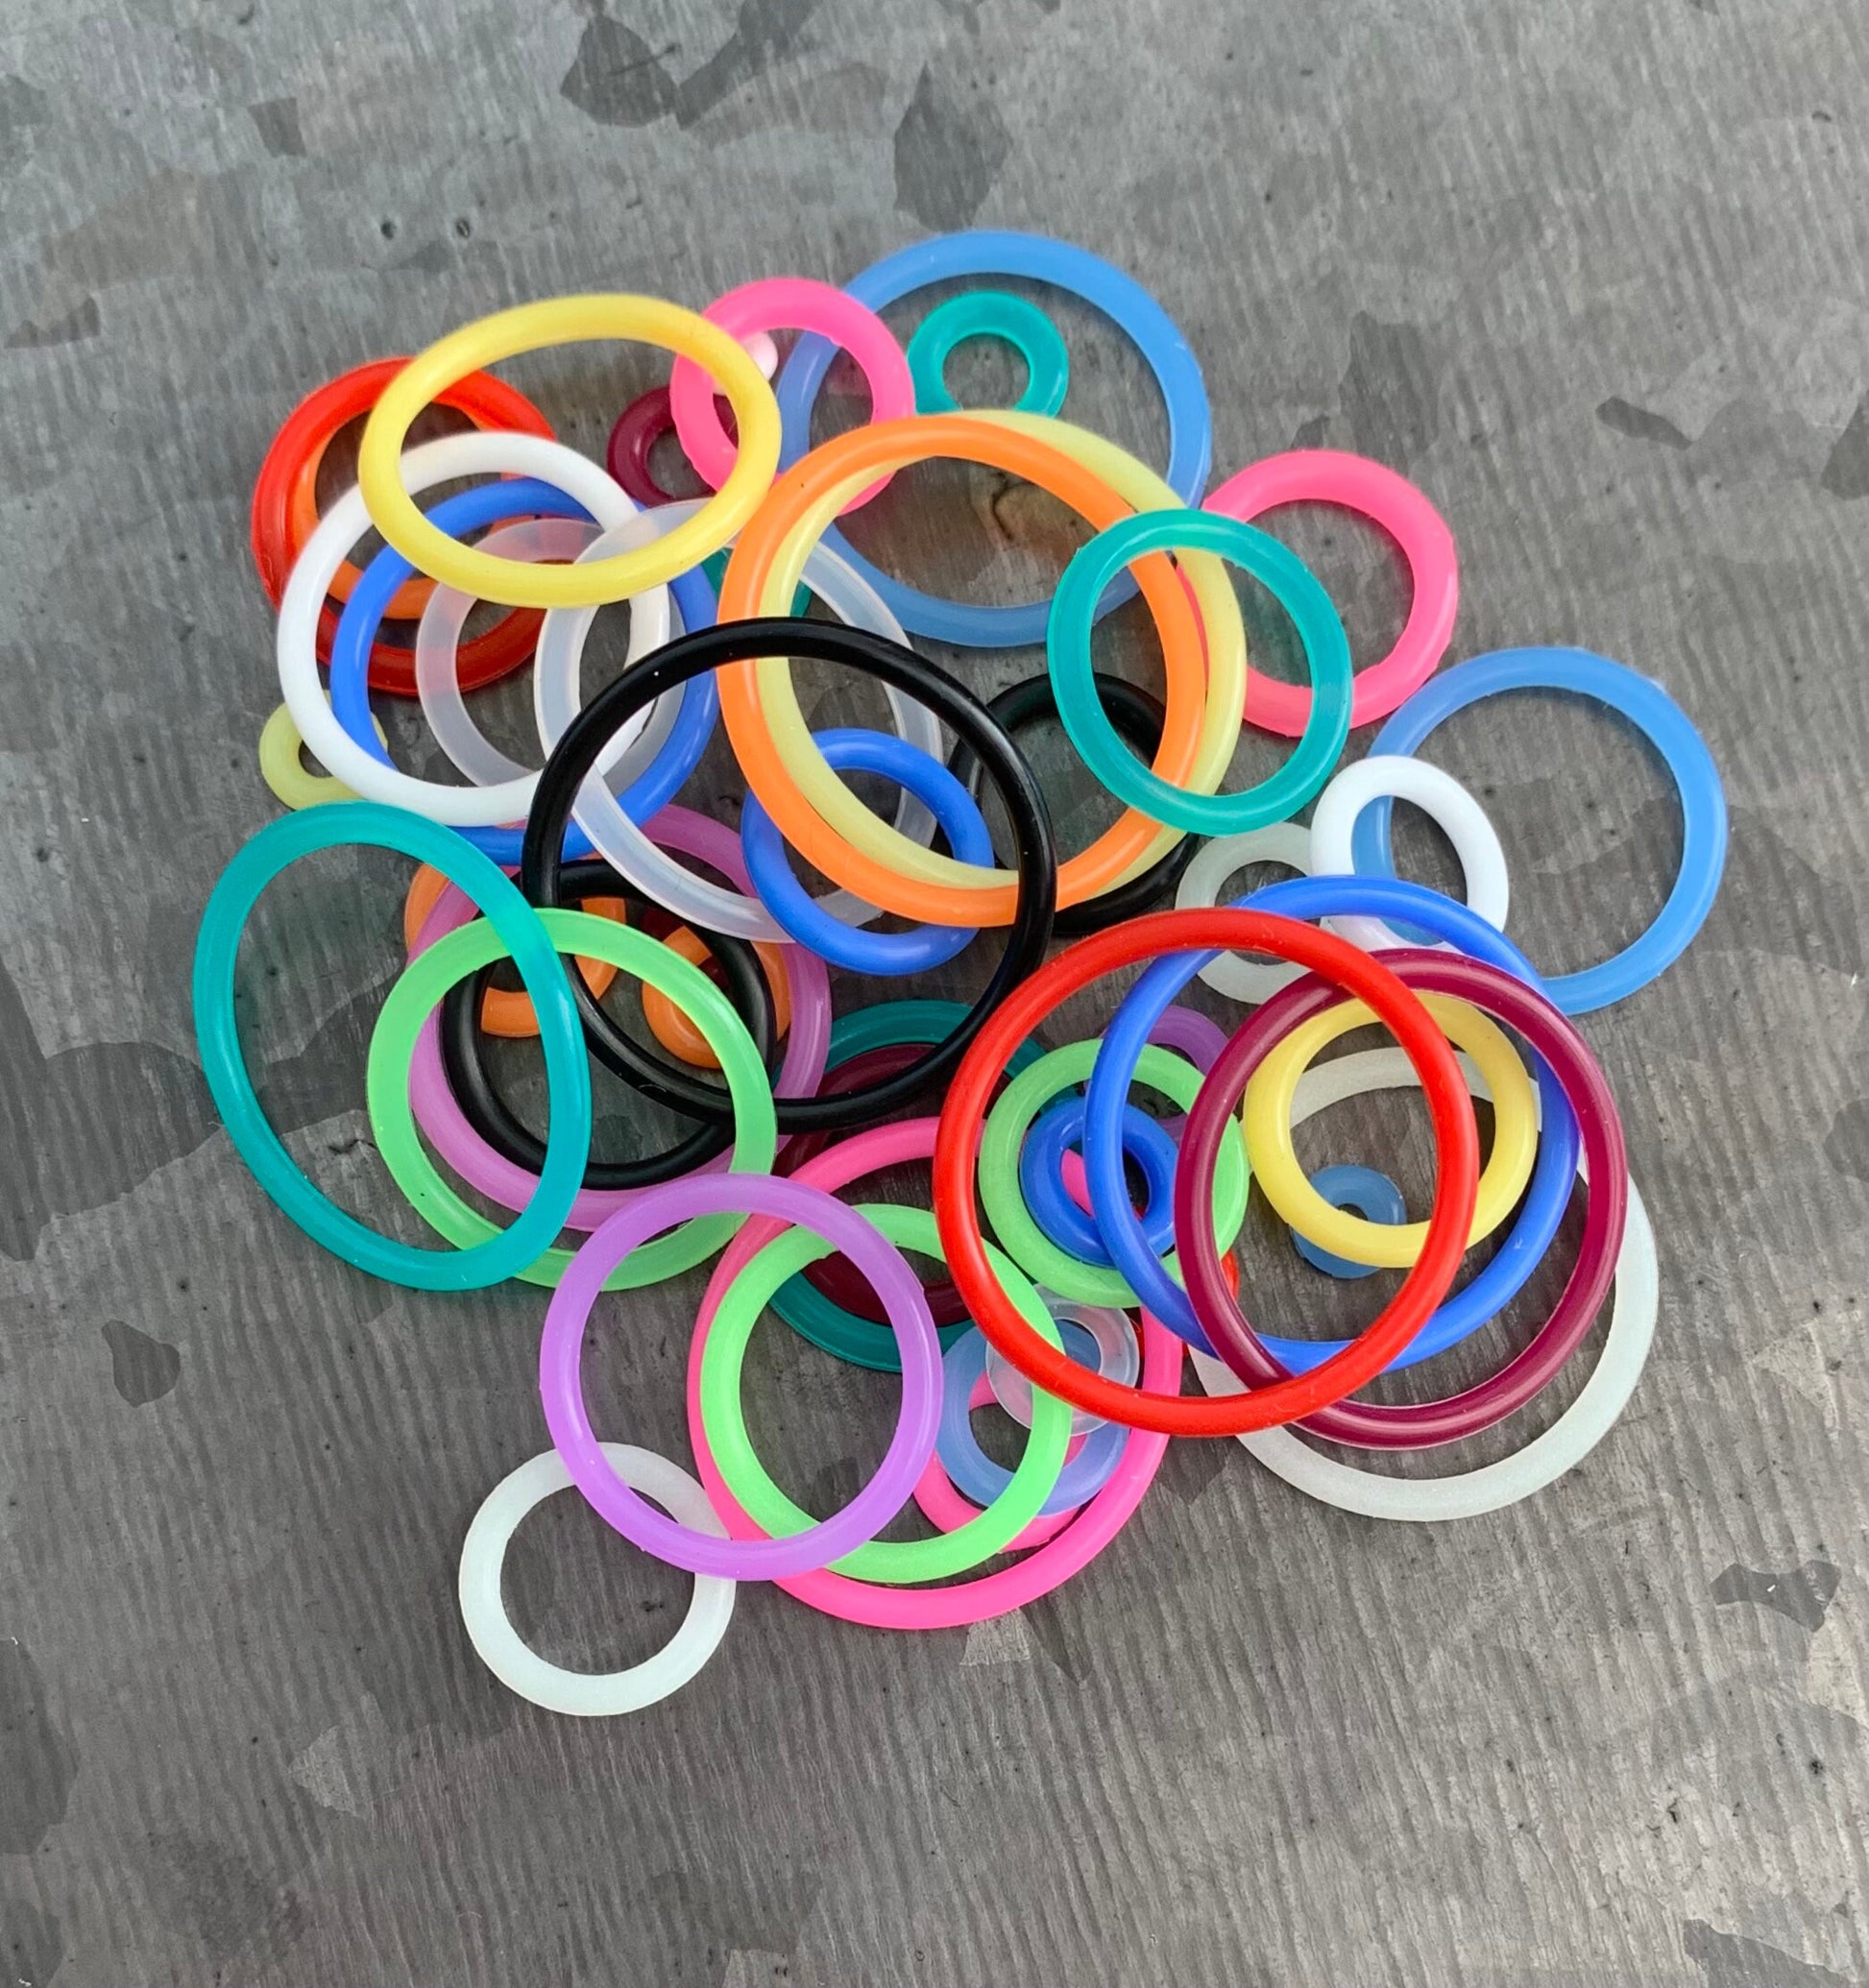 10 pack of Glow in the Dark Replacement O-Rings Bands for Plugs or Tunnels - 13 more colors available!